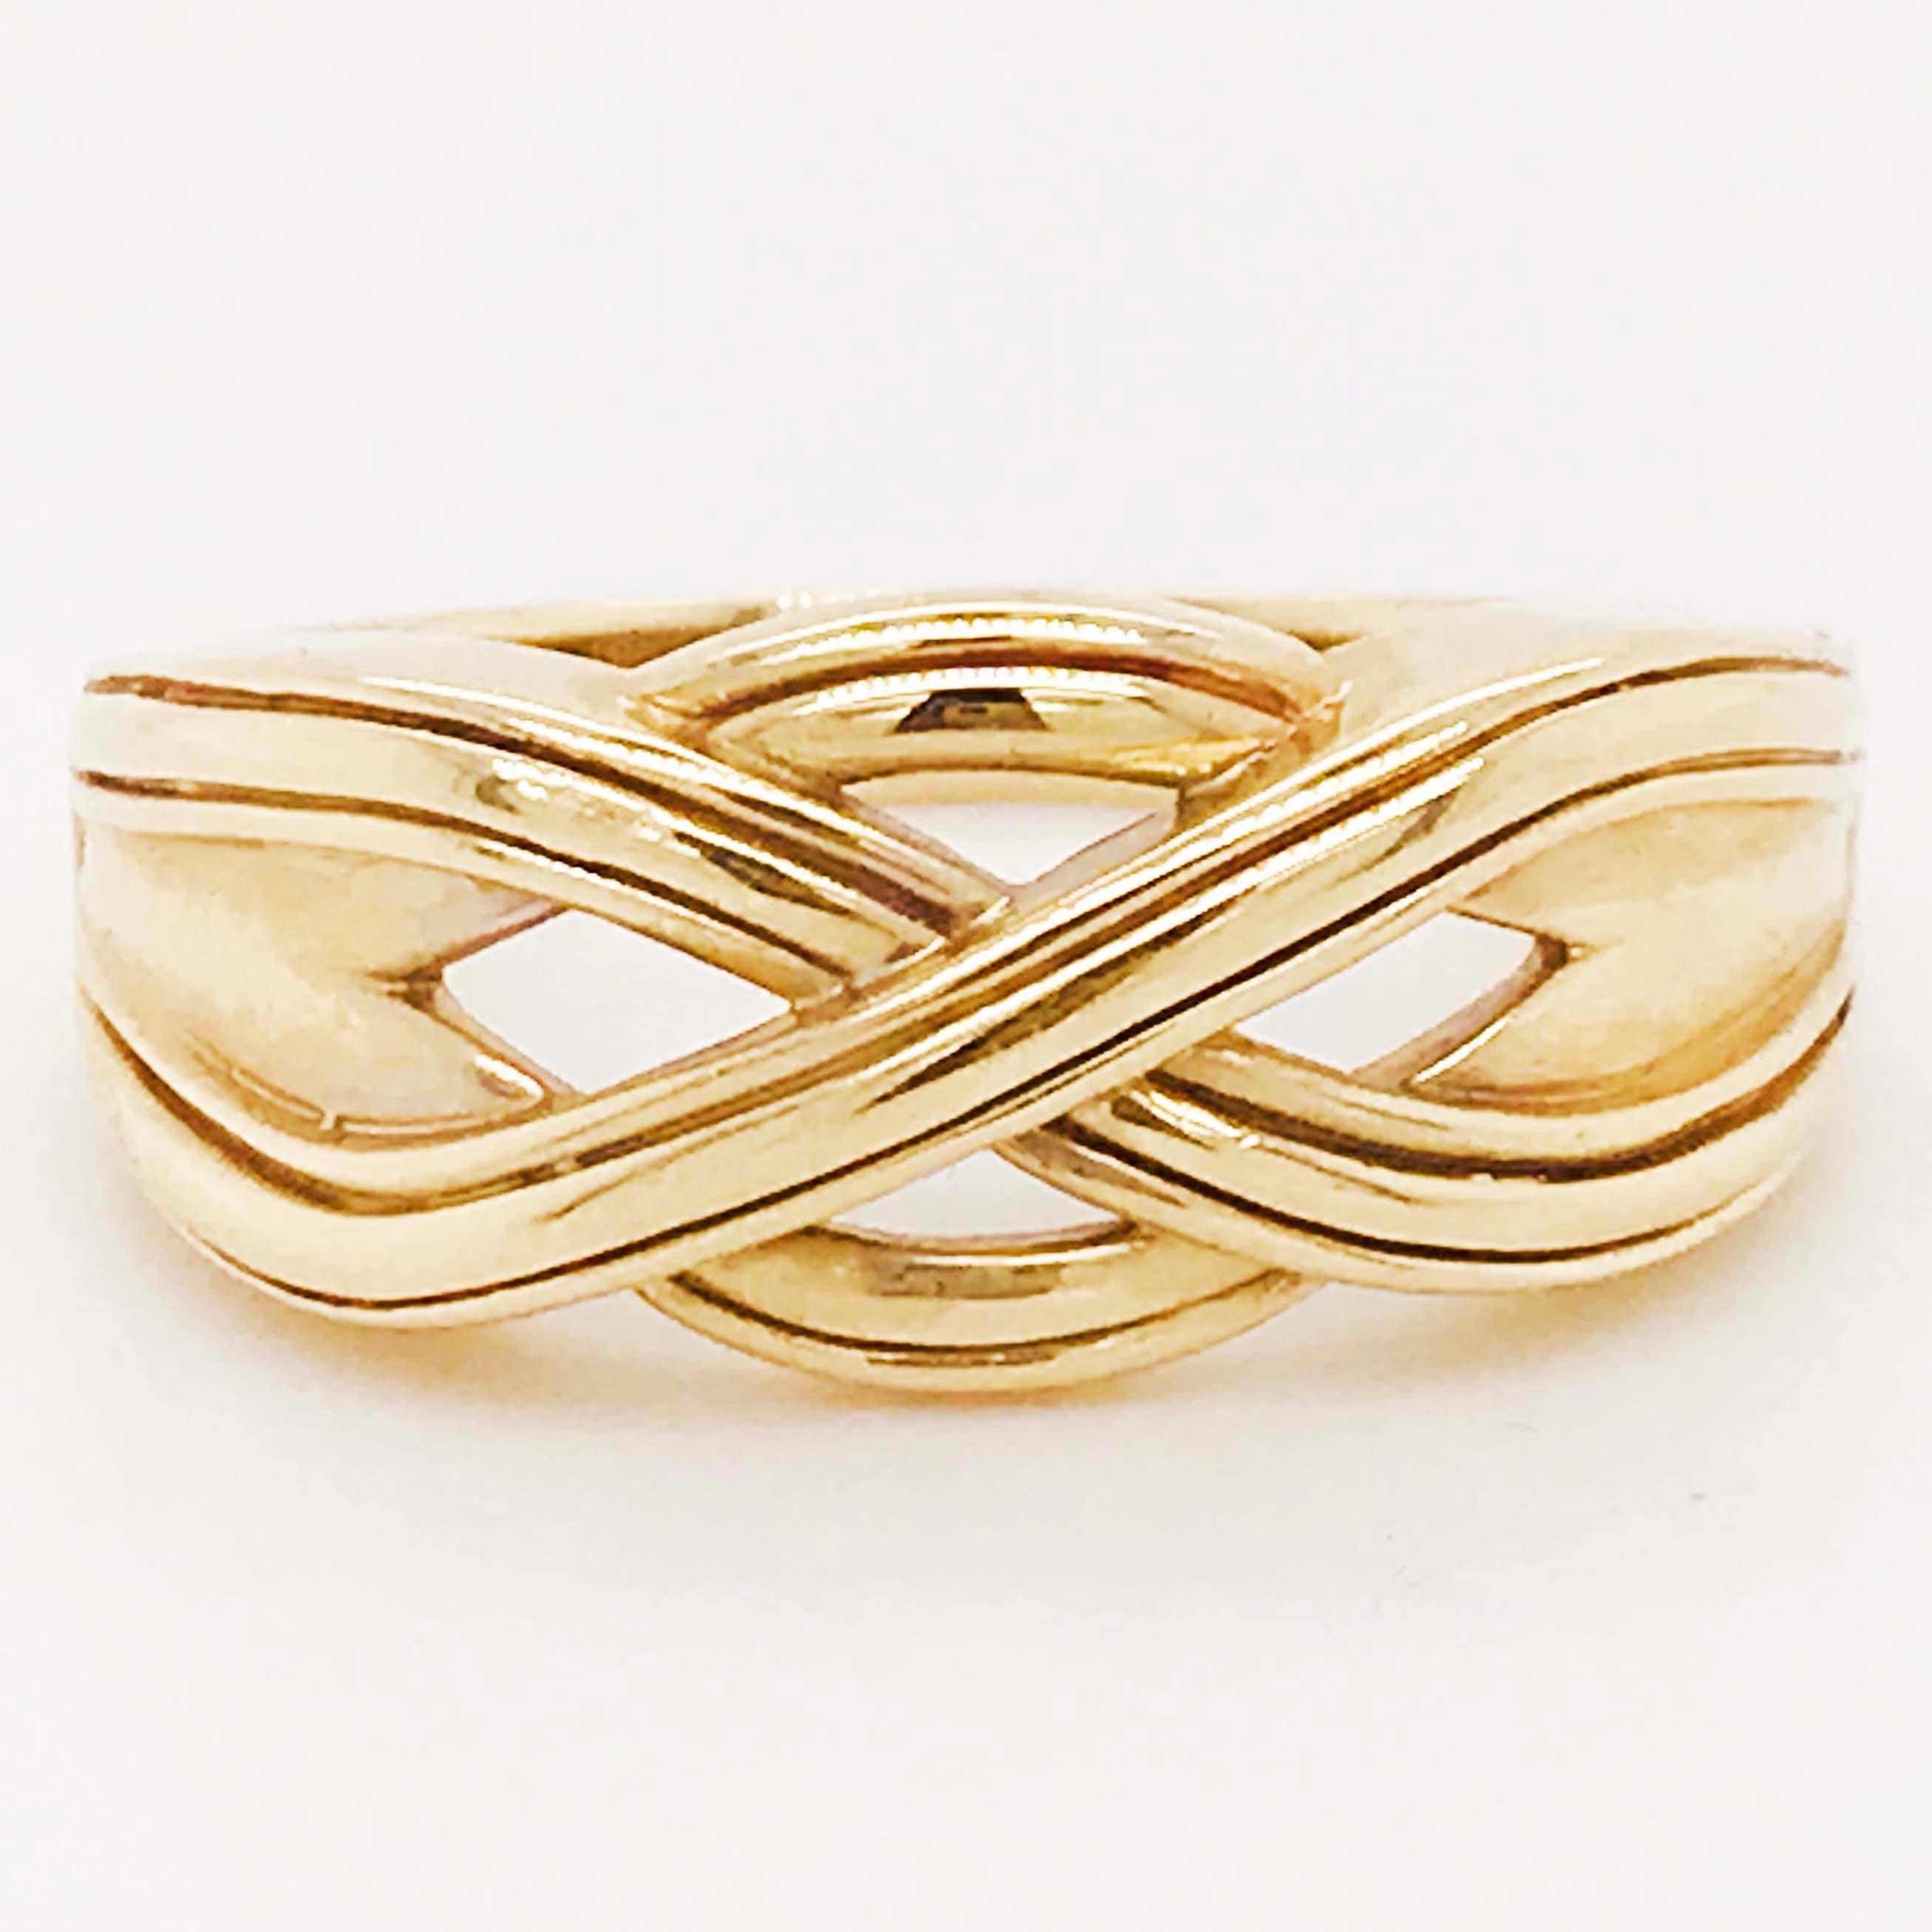 The Celtic ring is a man's band with the original Celtic knot or Trinity knot designed on the top of the ring. This piece has been handmade and crafted beautifully! With precious metal, 14k yellow gold. The ring is a rich yellow gold color and a